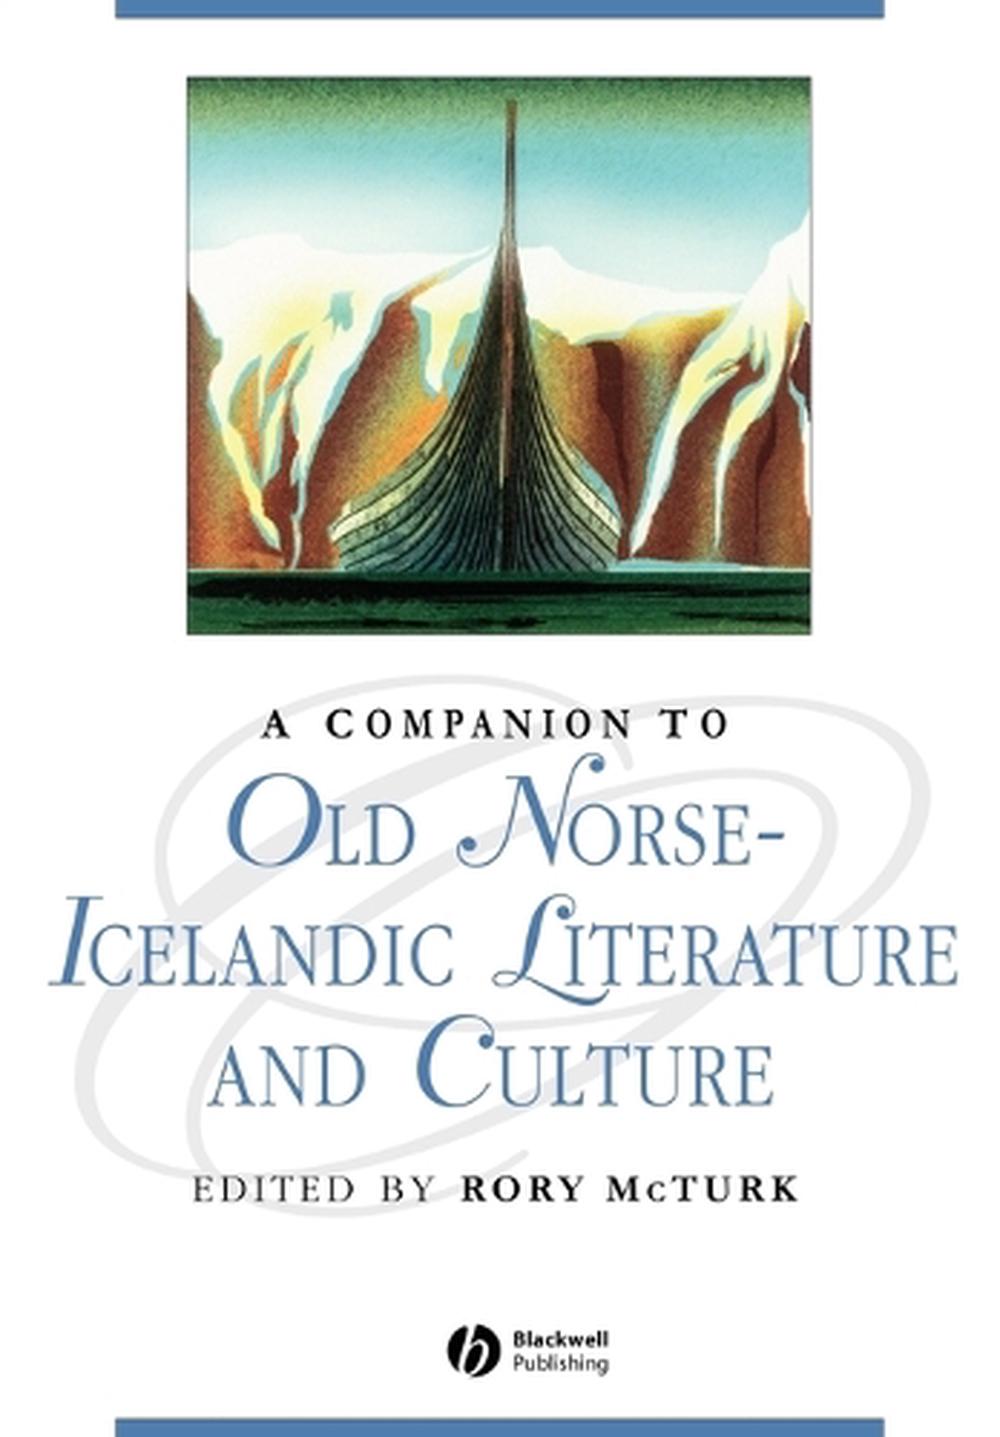 A Companion to Old NorseIcelandic Literature and Culture by Rory